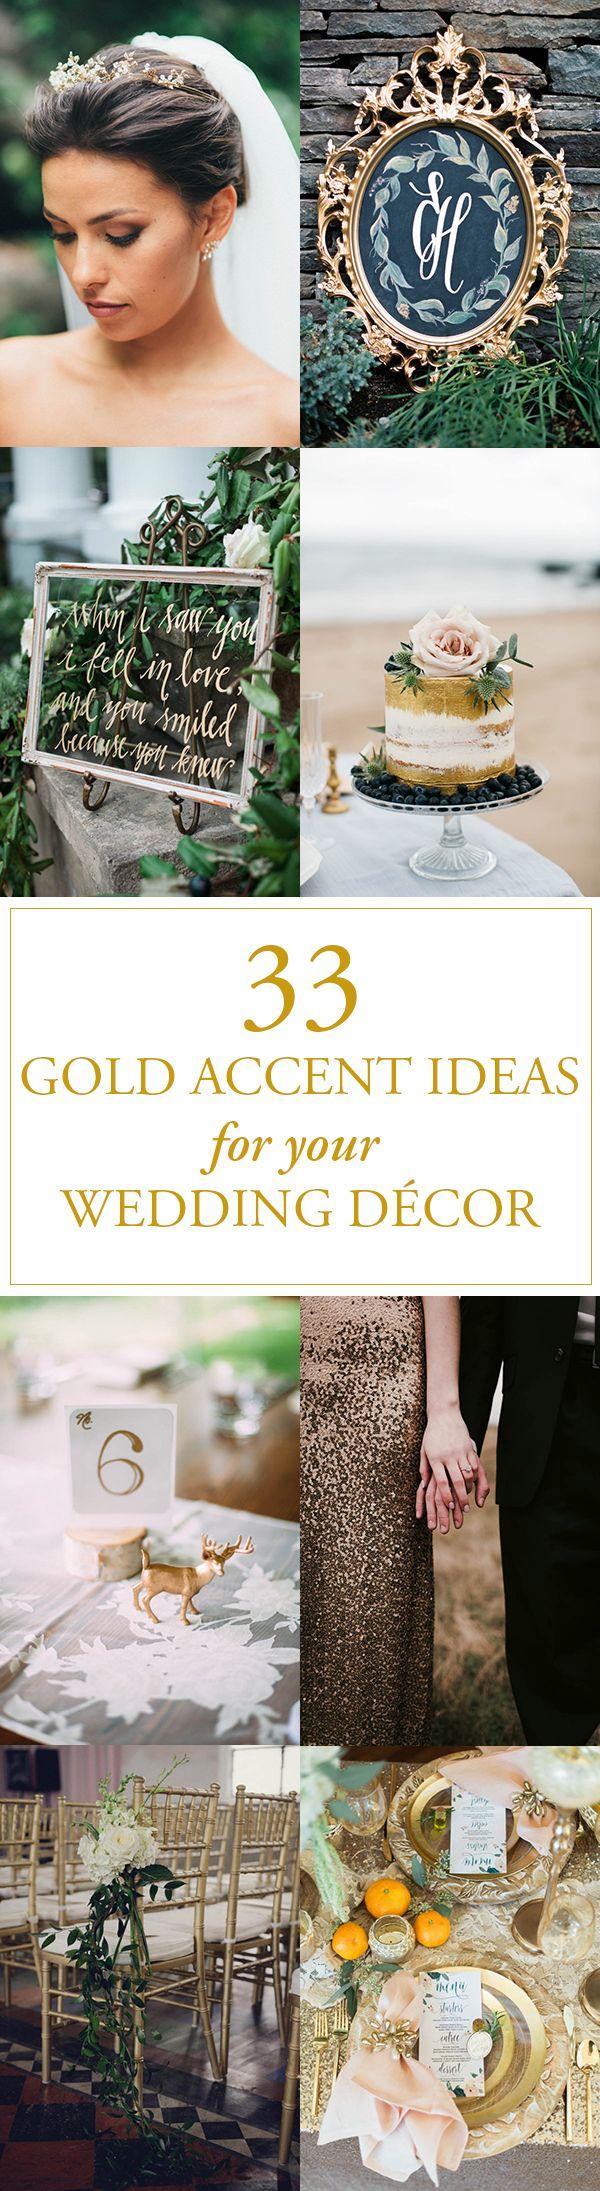 Wedding - Make Your Wedding Décor Shine With These Gold Accent Ideas